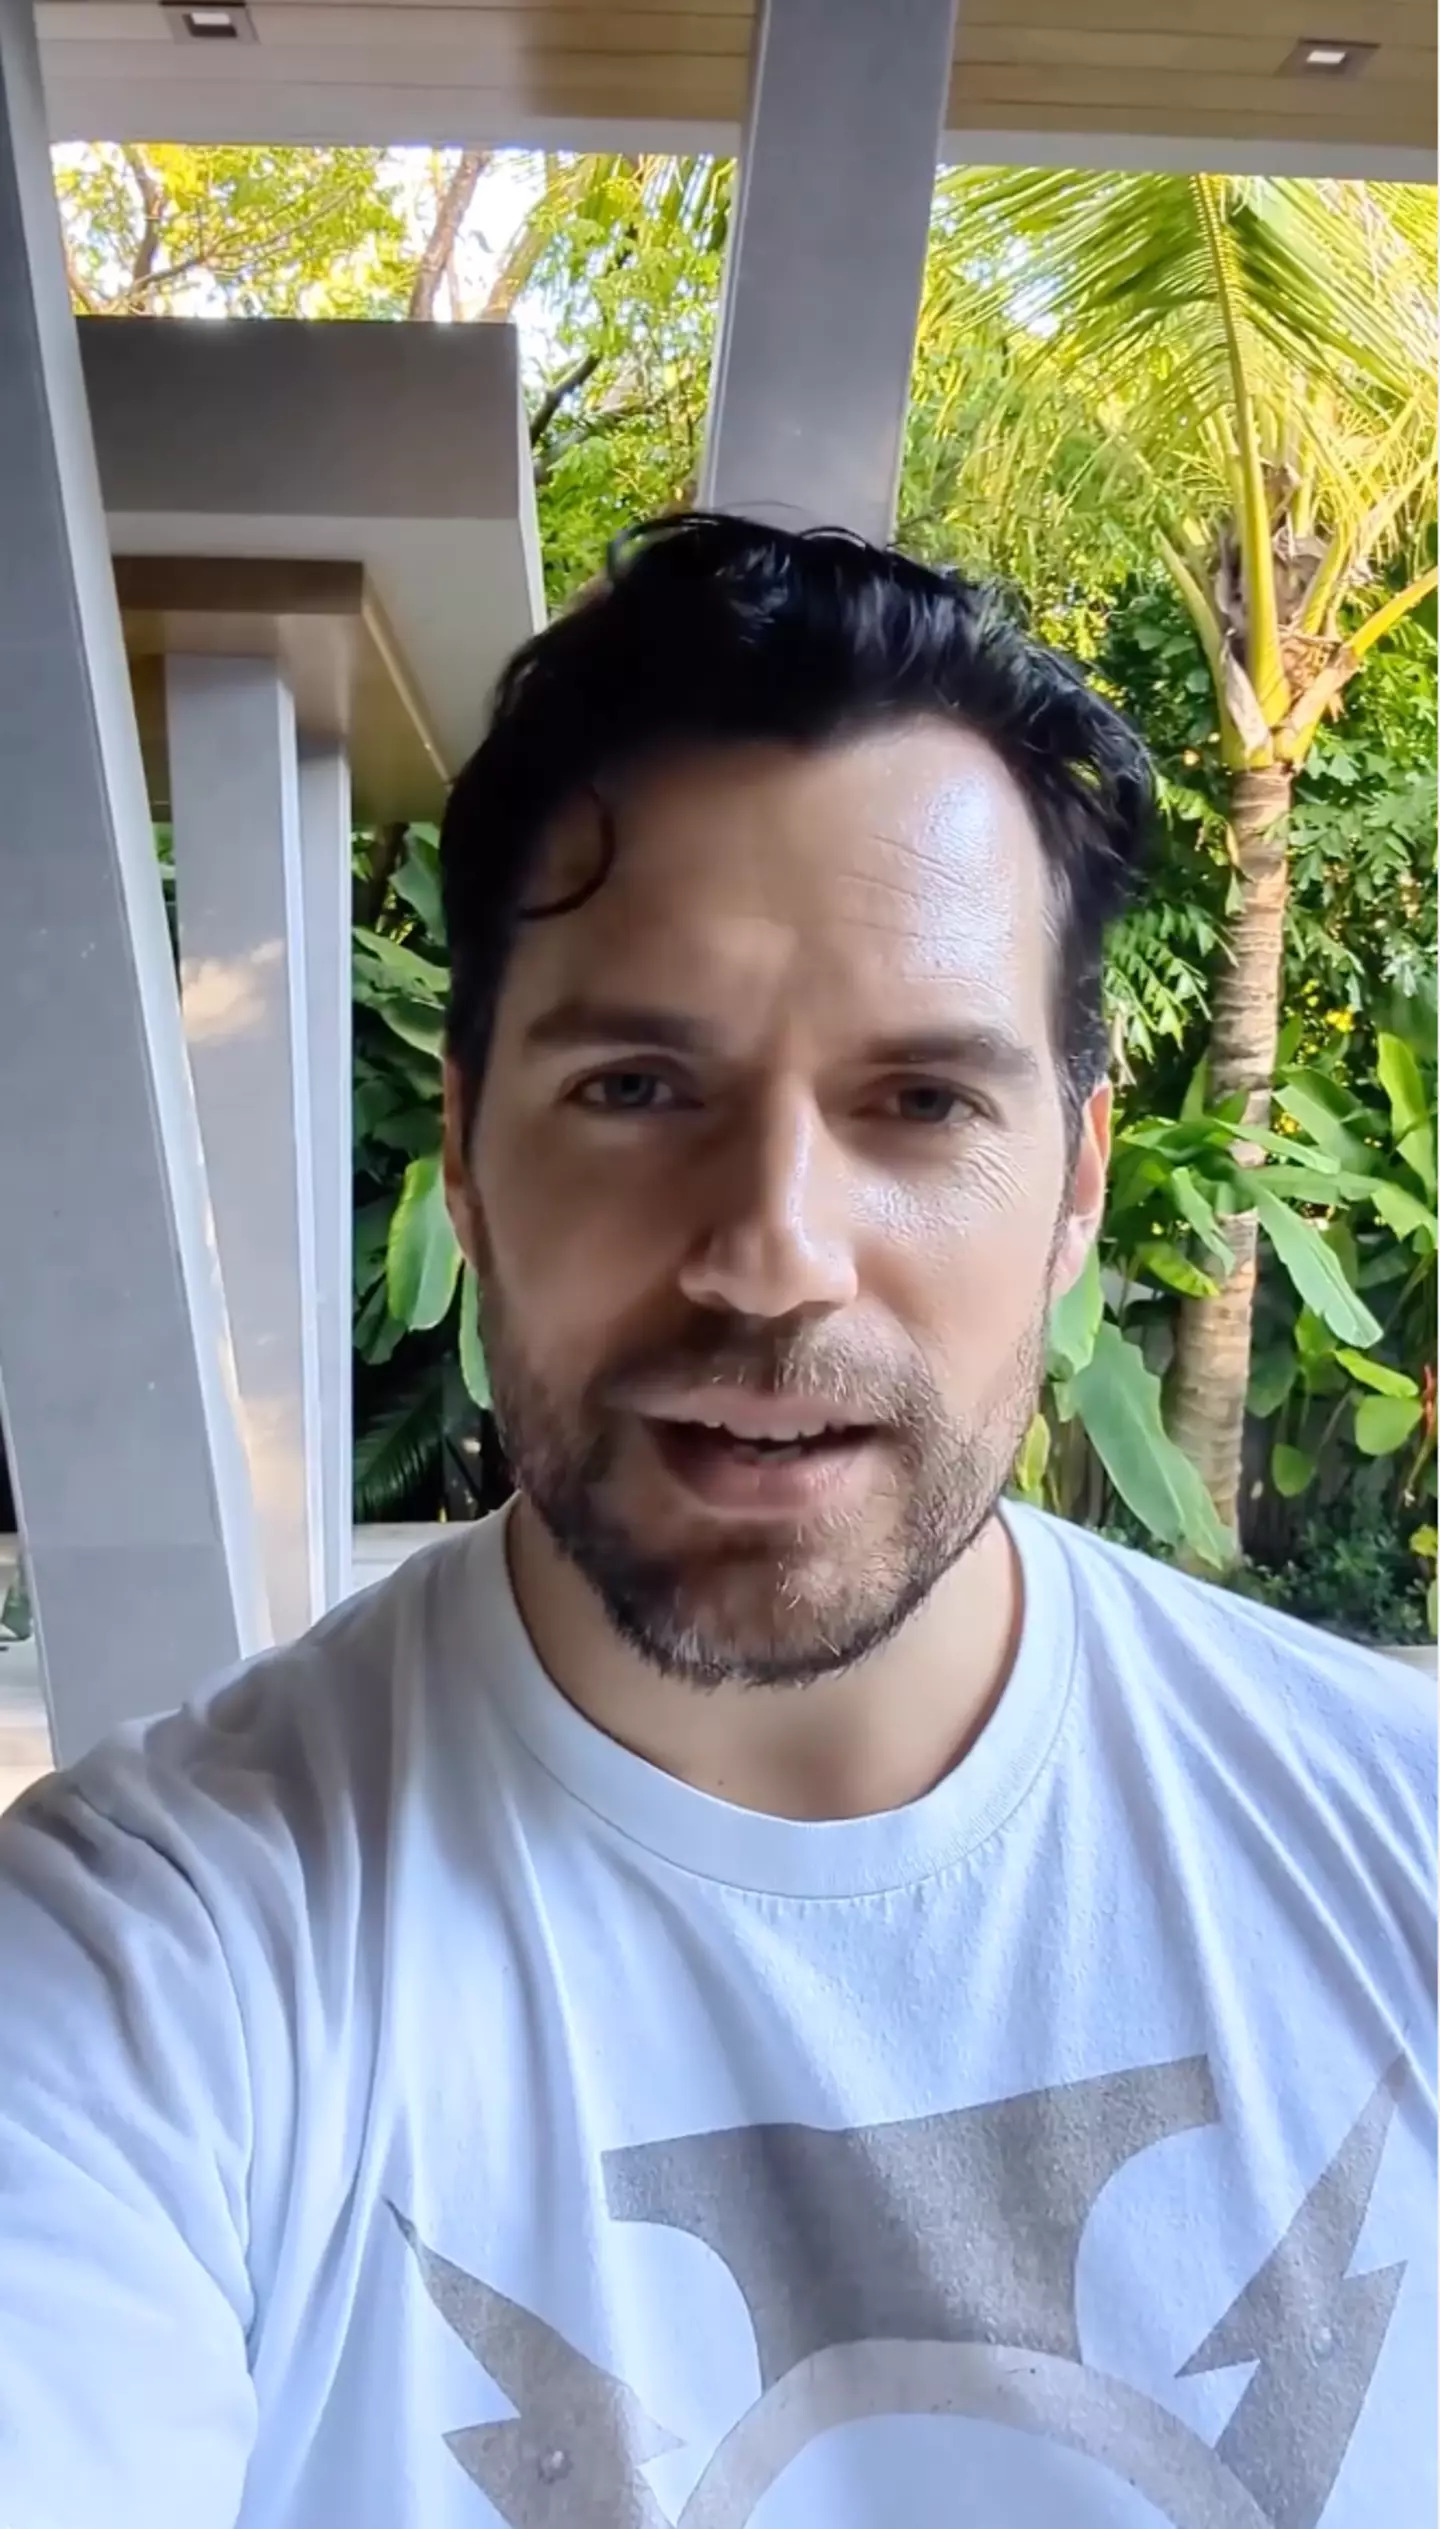 Henry Cavill had excitedly told fans about his return.